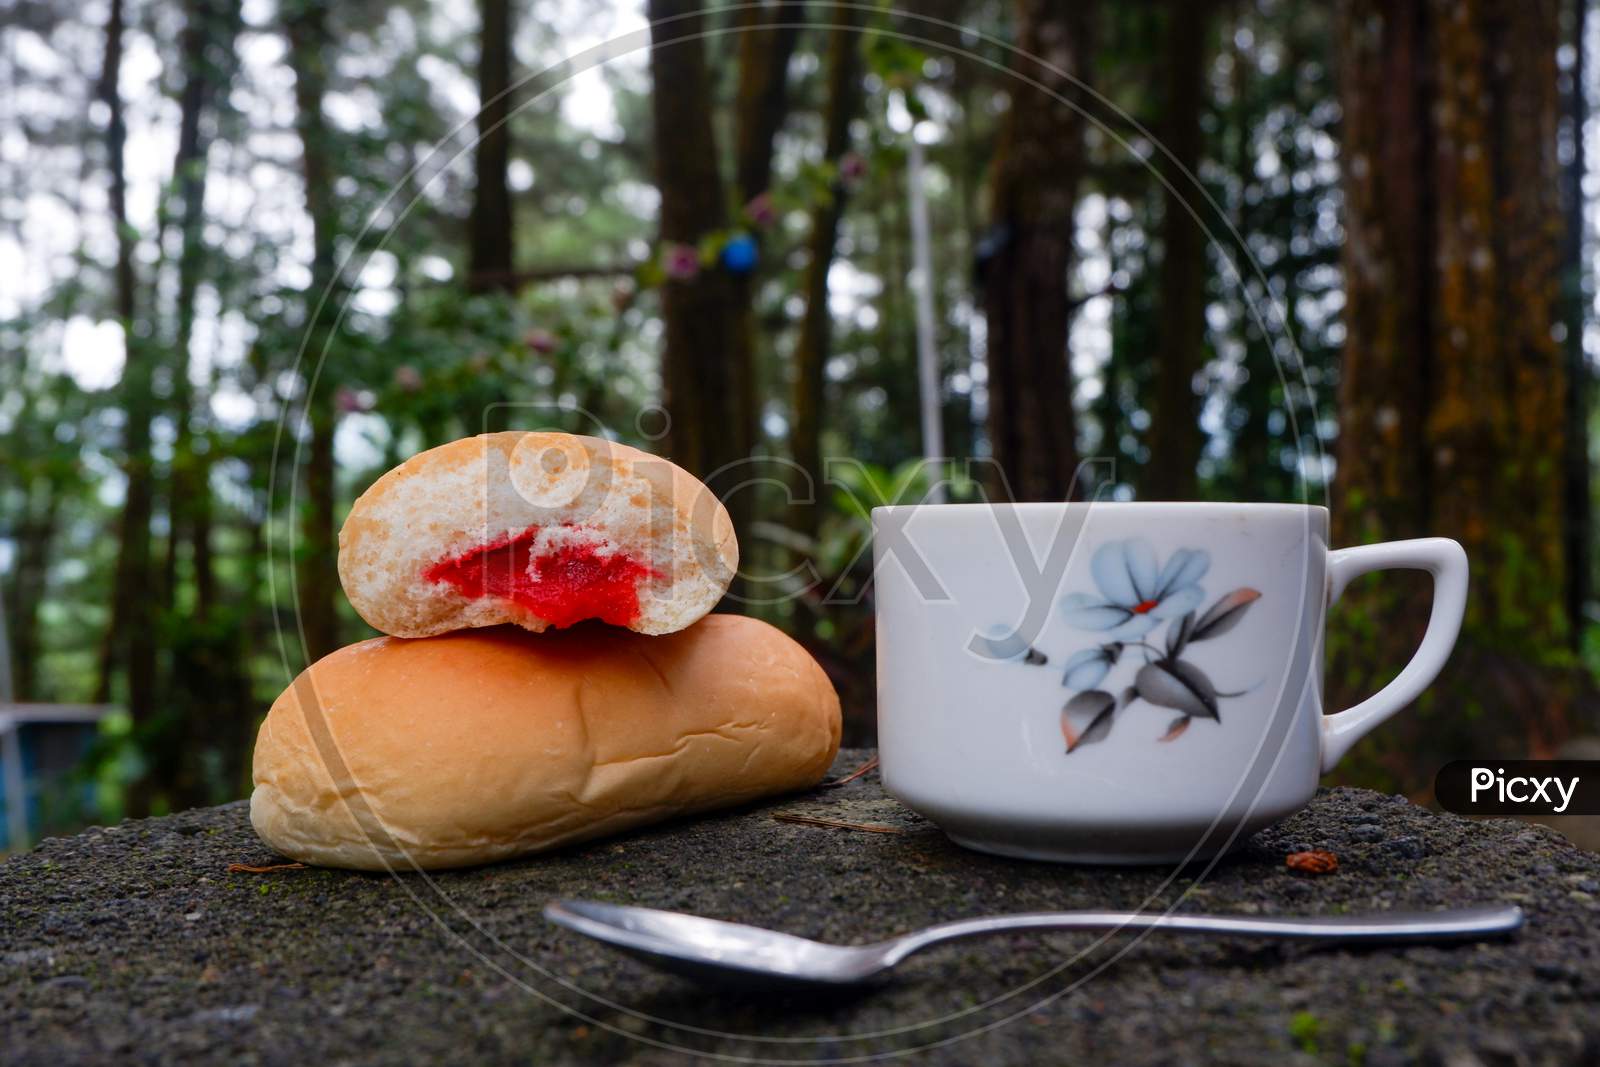 Photo Of Bread With Strawberry Jam With A Cup Of Tea. In A Photo In A Forest